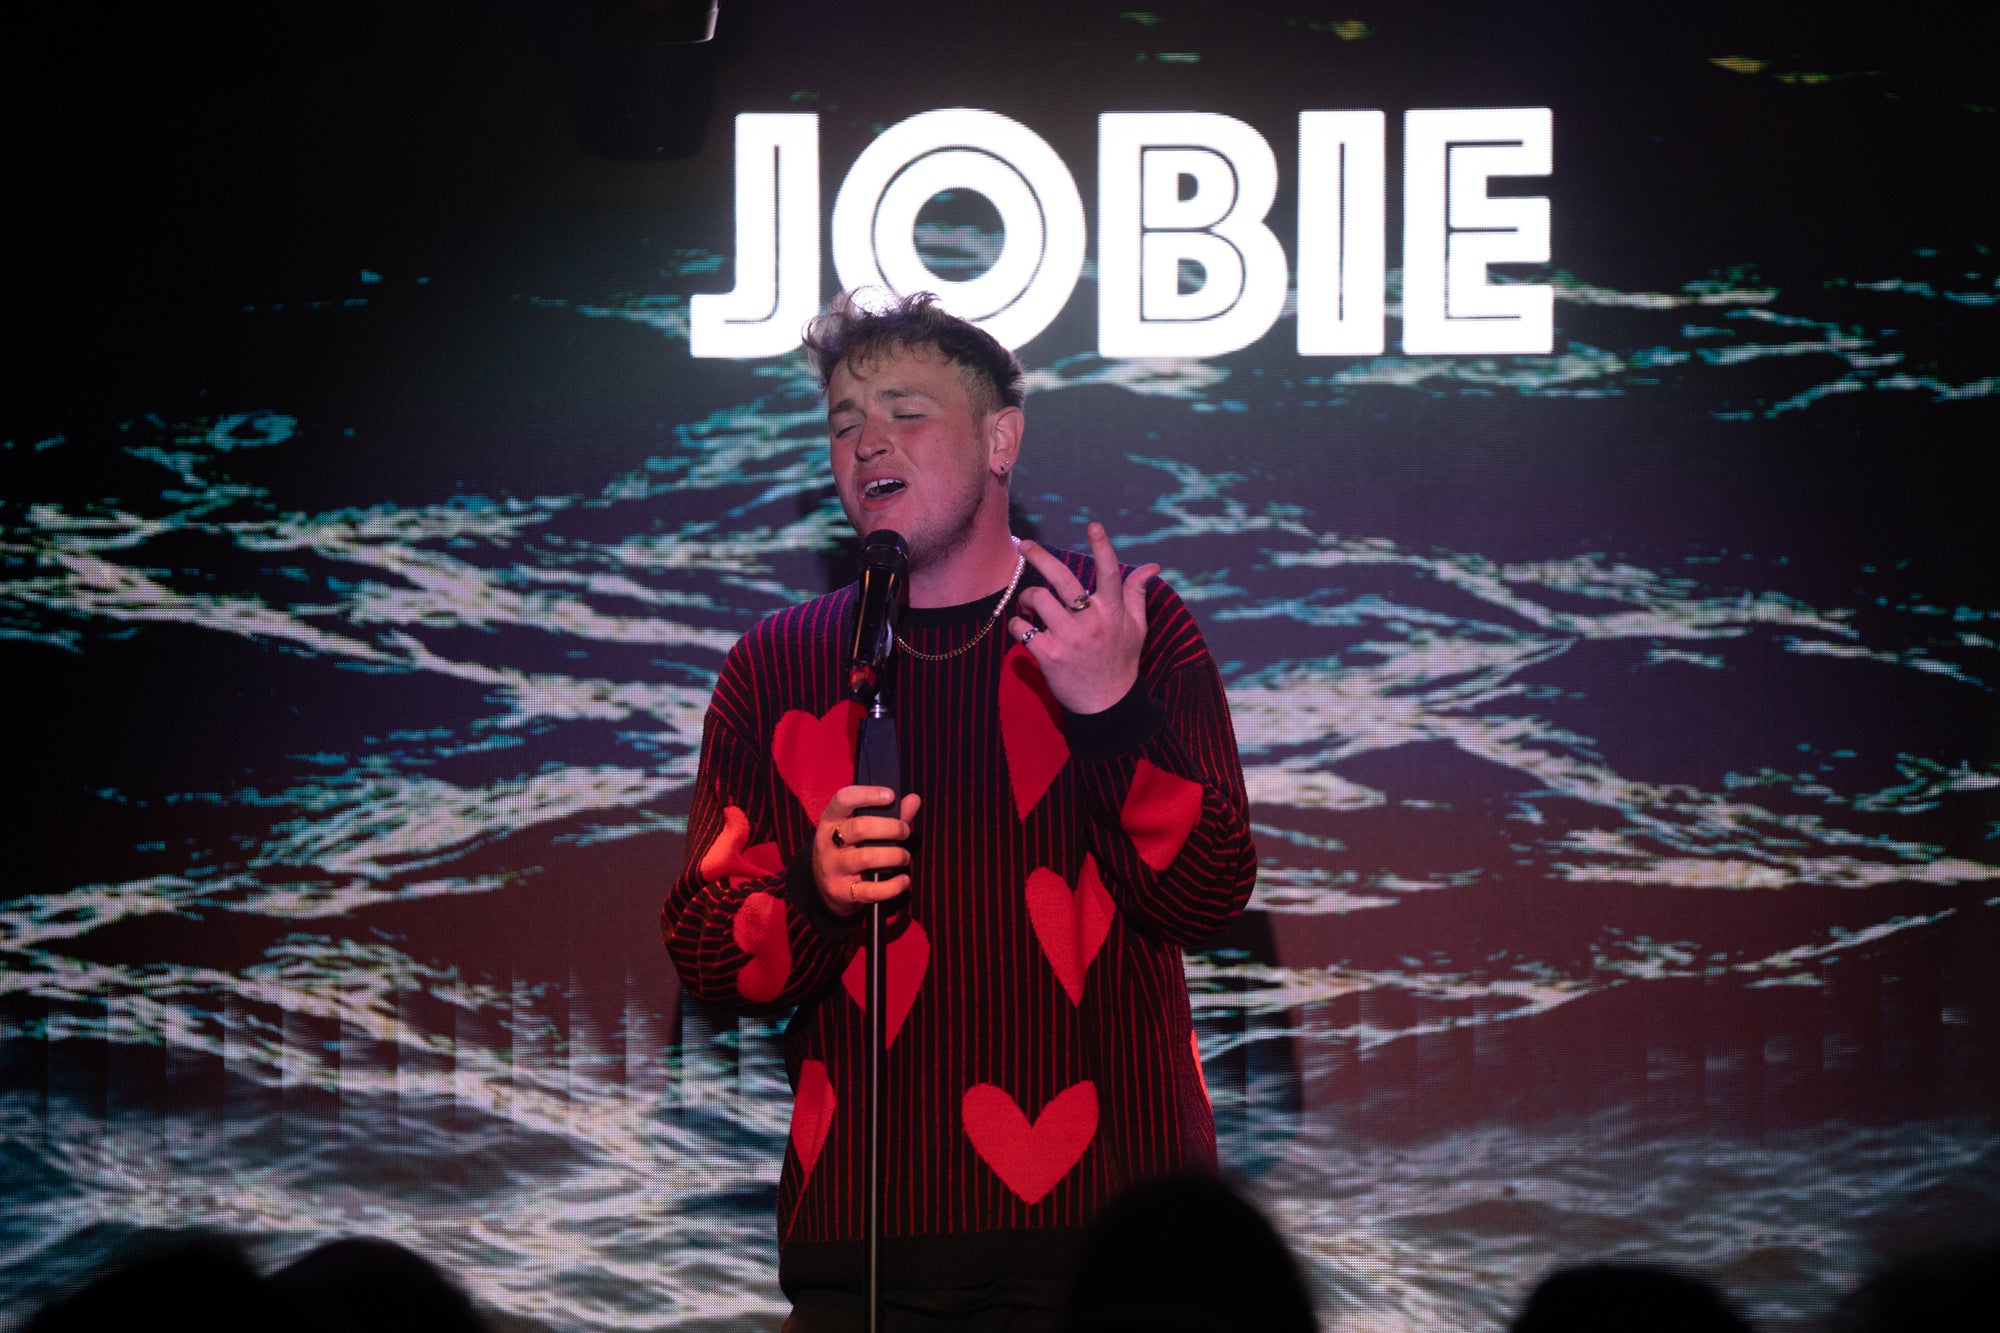 On the singing side, Jobie is another finalist this year